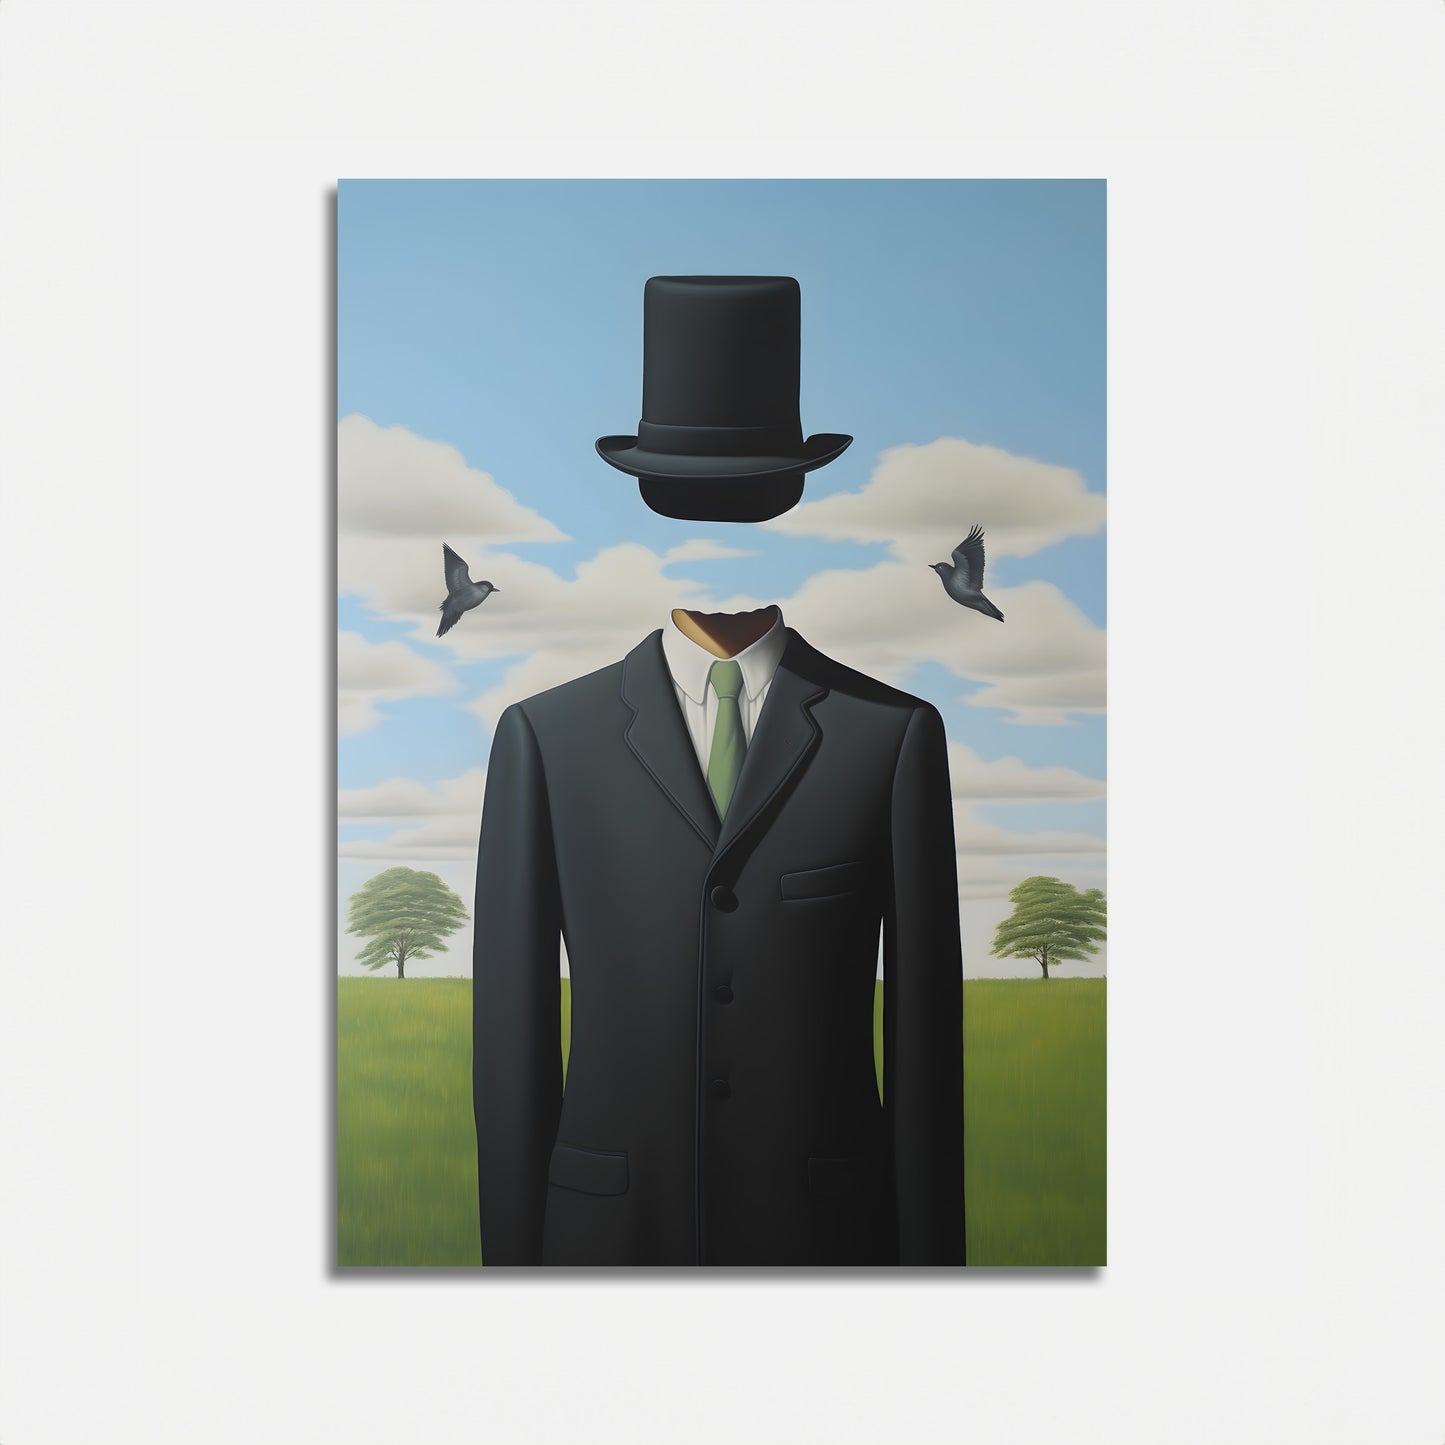 An illustration of a man in a suit with a bowler hat for a head, birds, and a landscape background.